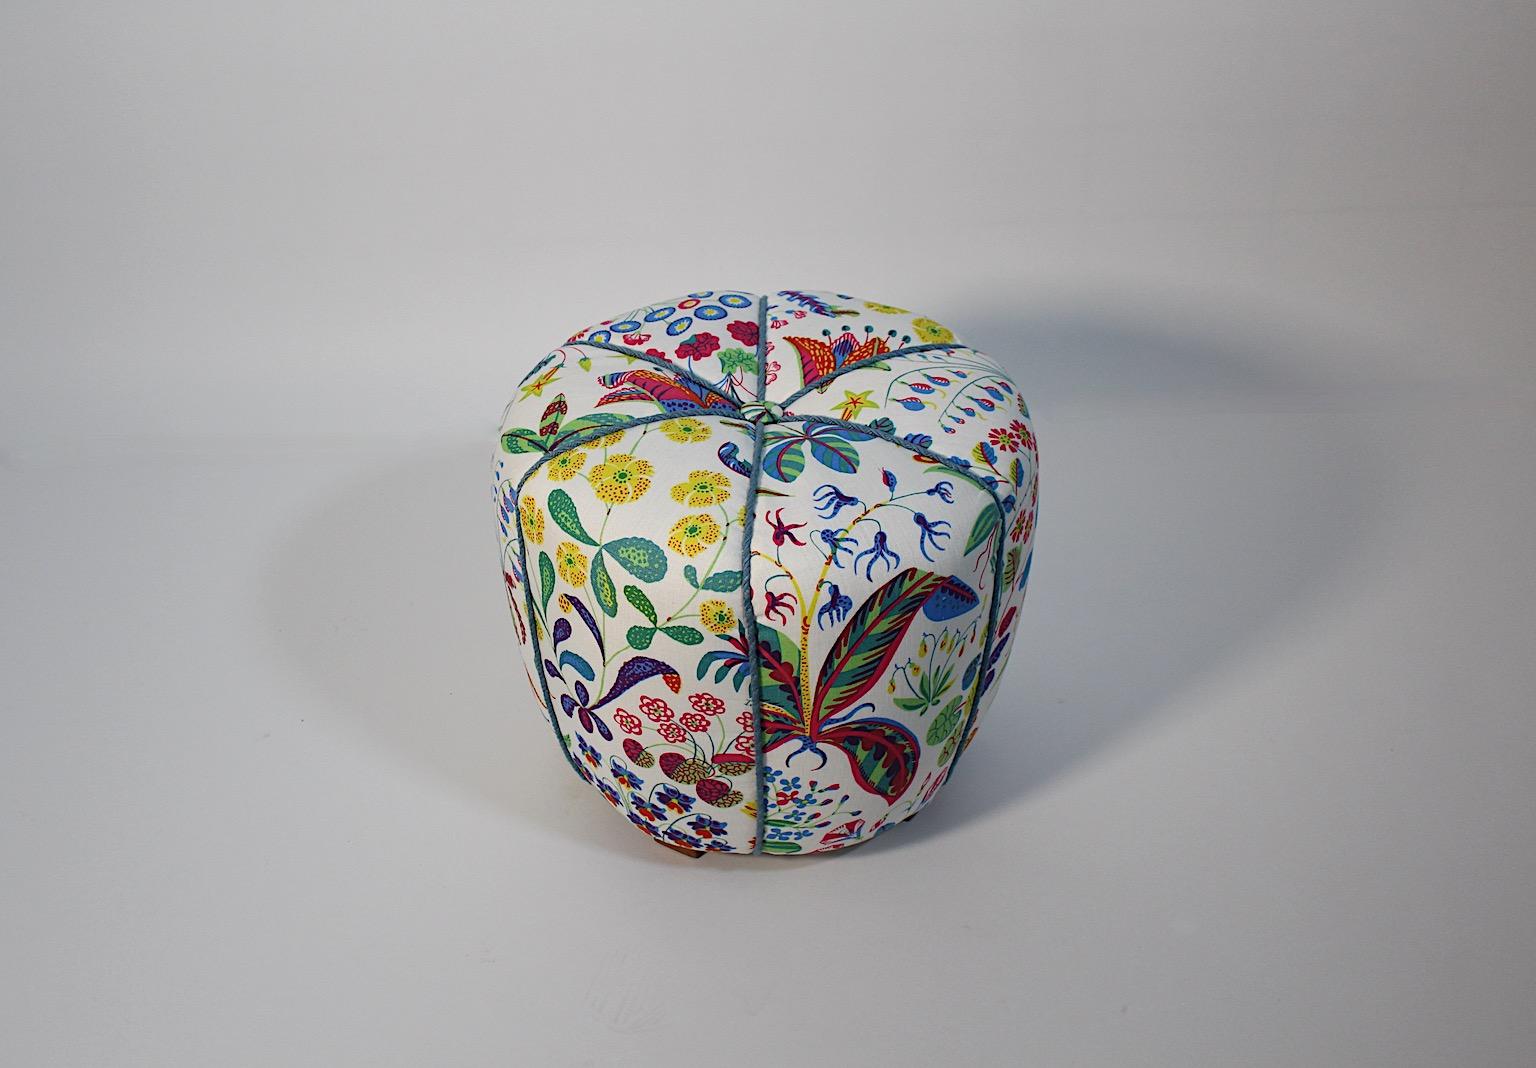 Art Deco vintage pouf or stool beech white Josef Frank Fabric 1930s Vienna.
A stunning pouf or stool from beech and white fabric with lush pattern by Josef Frank for Svenskt Tenn with beech feet.
This reupholstered pouf shows an amazing cover with